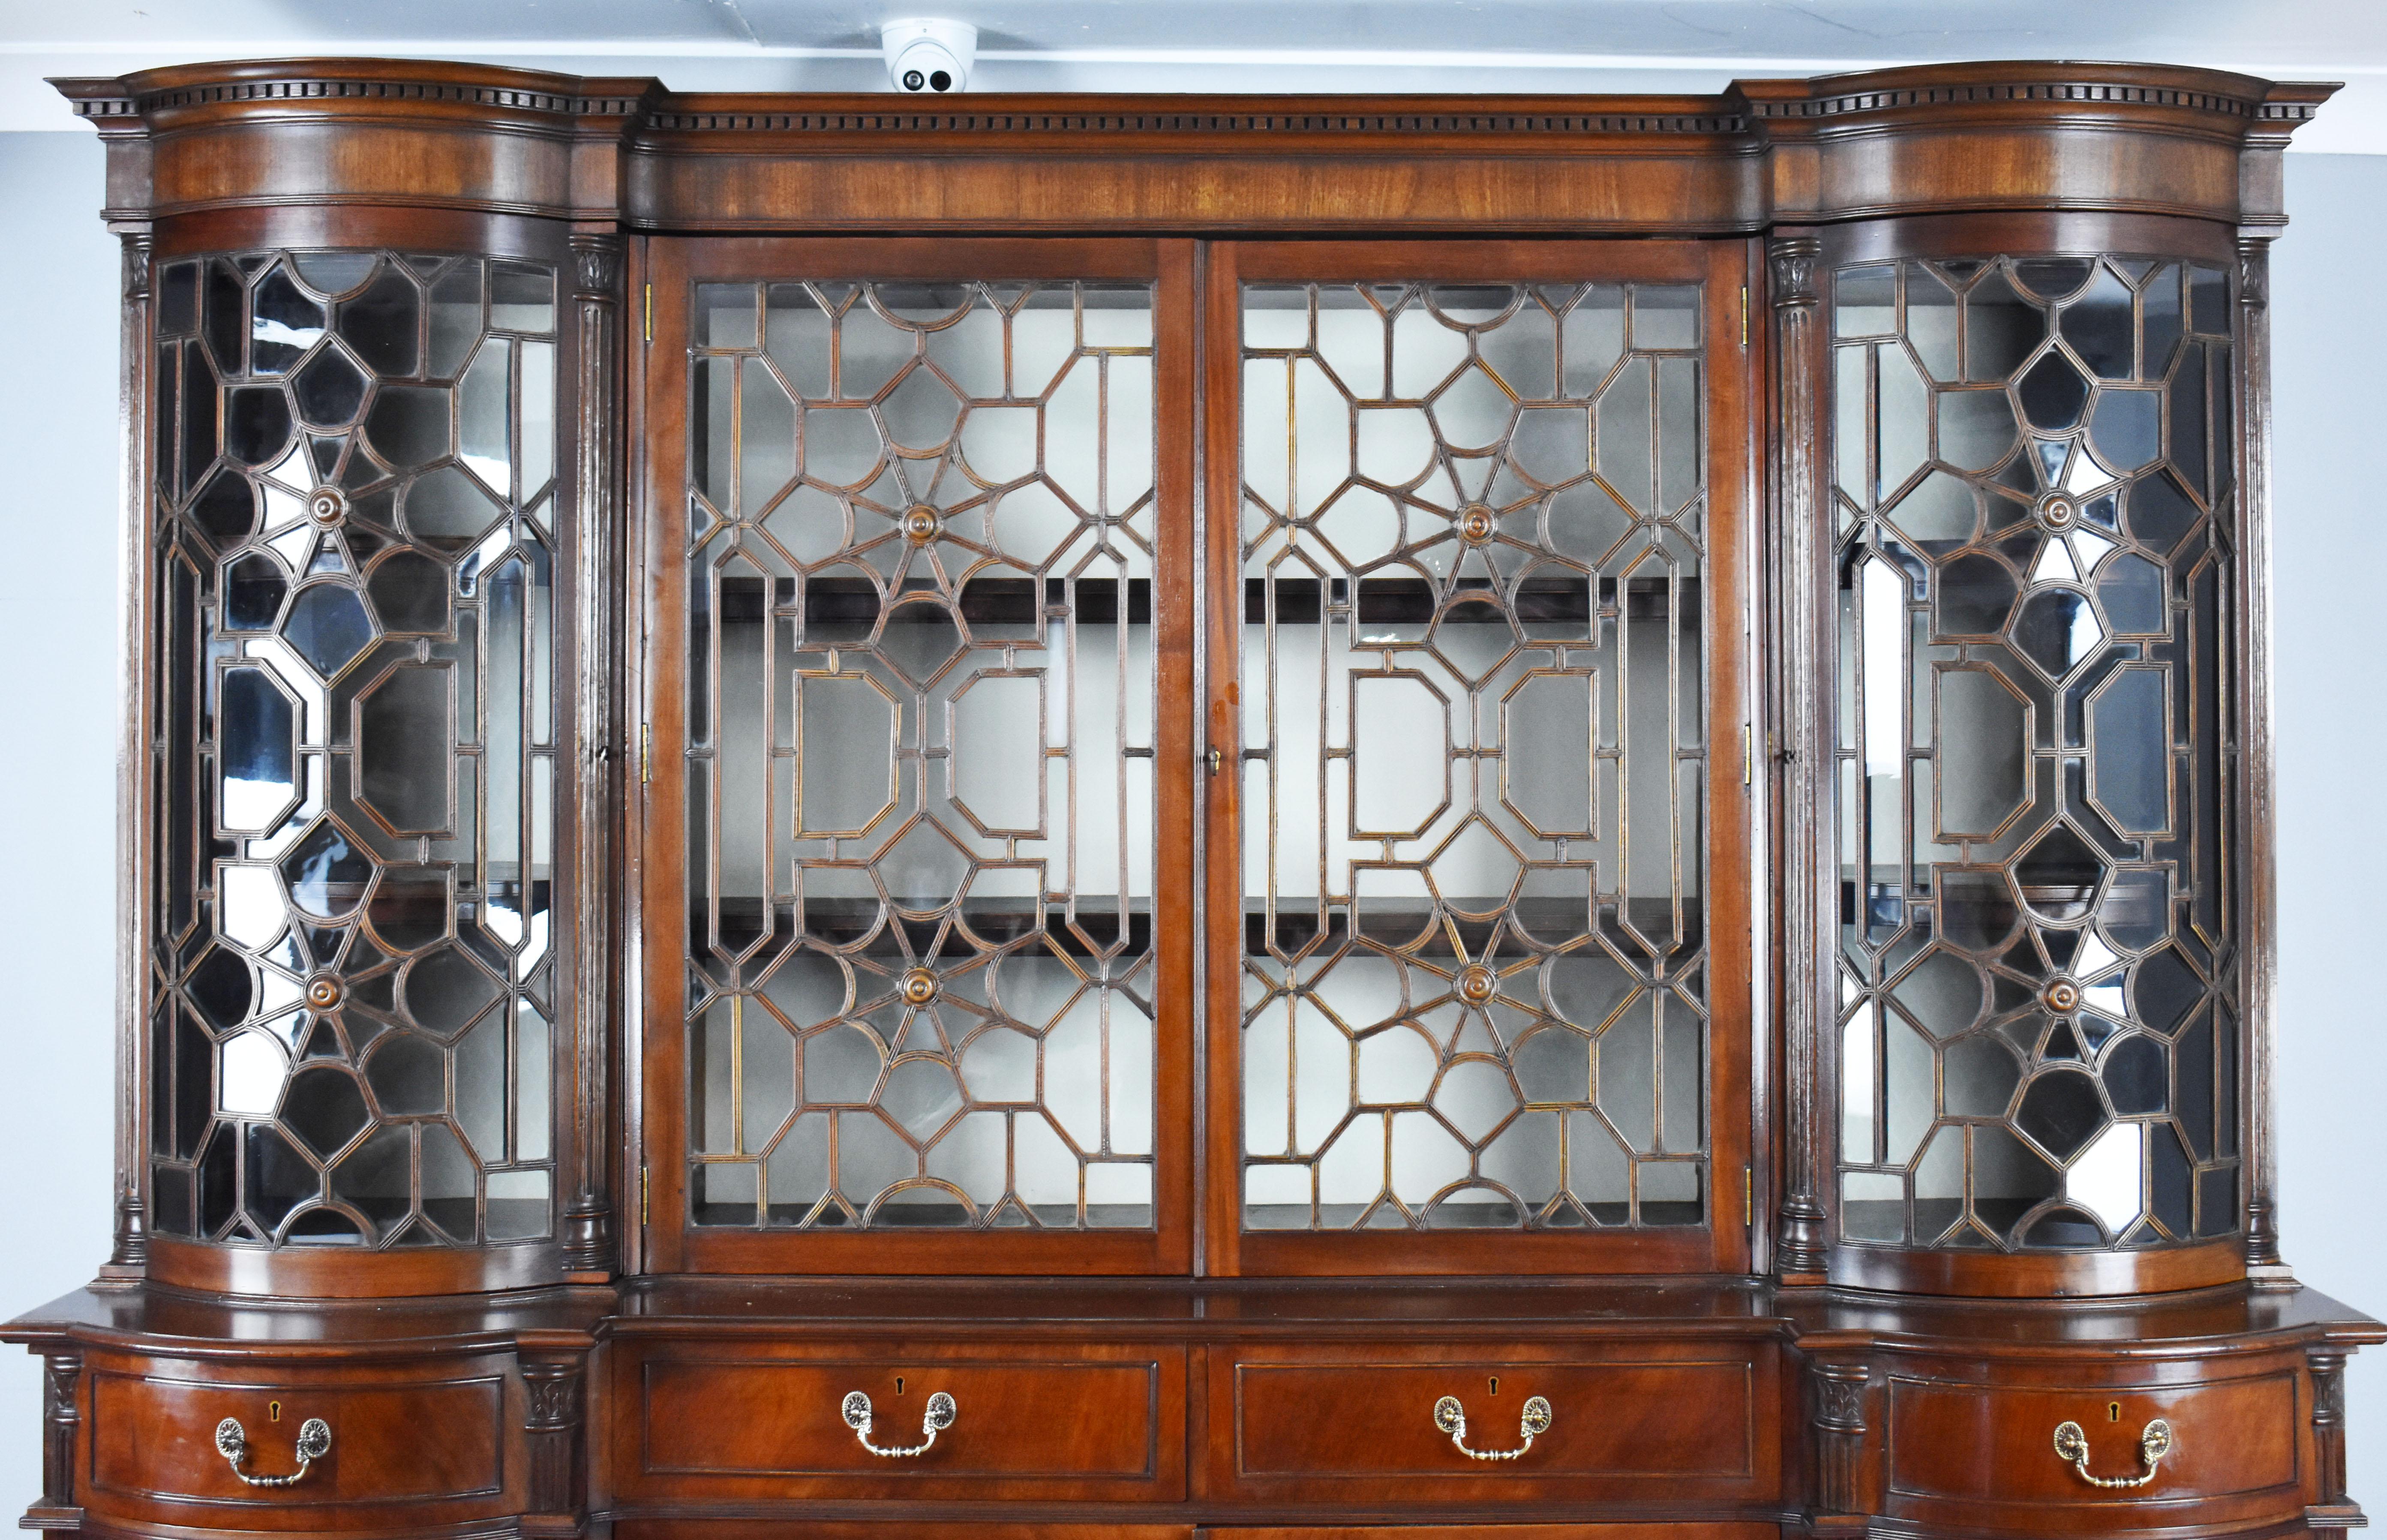 For sale is a fine quality and unusual 19th century English mahogany breakfront bookcase. Having four glazed doors, each with the most ornate glazing bars. The end sections opening to a fabric lined interior complete with adjustable shelves. The